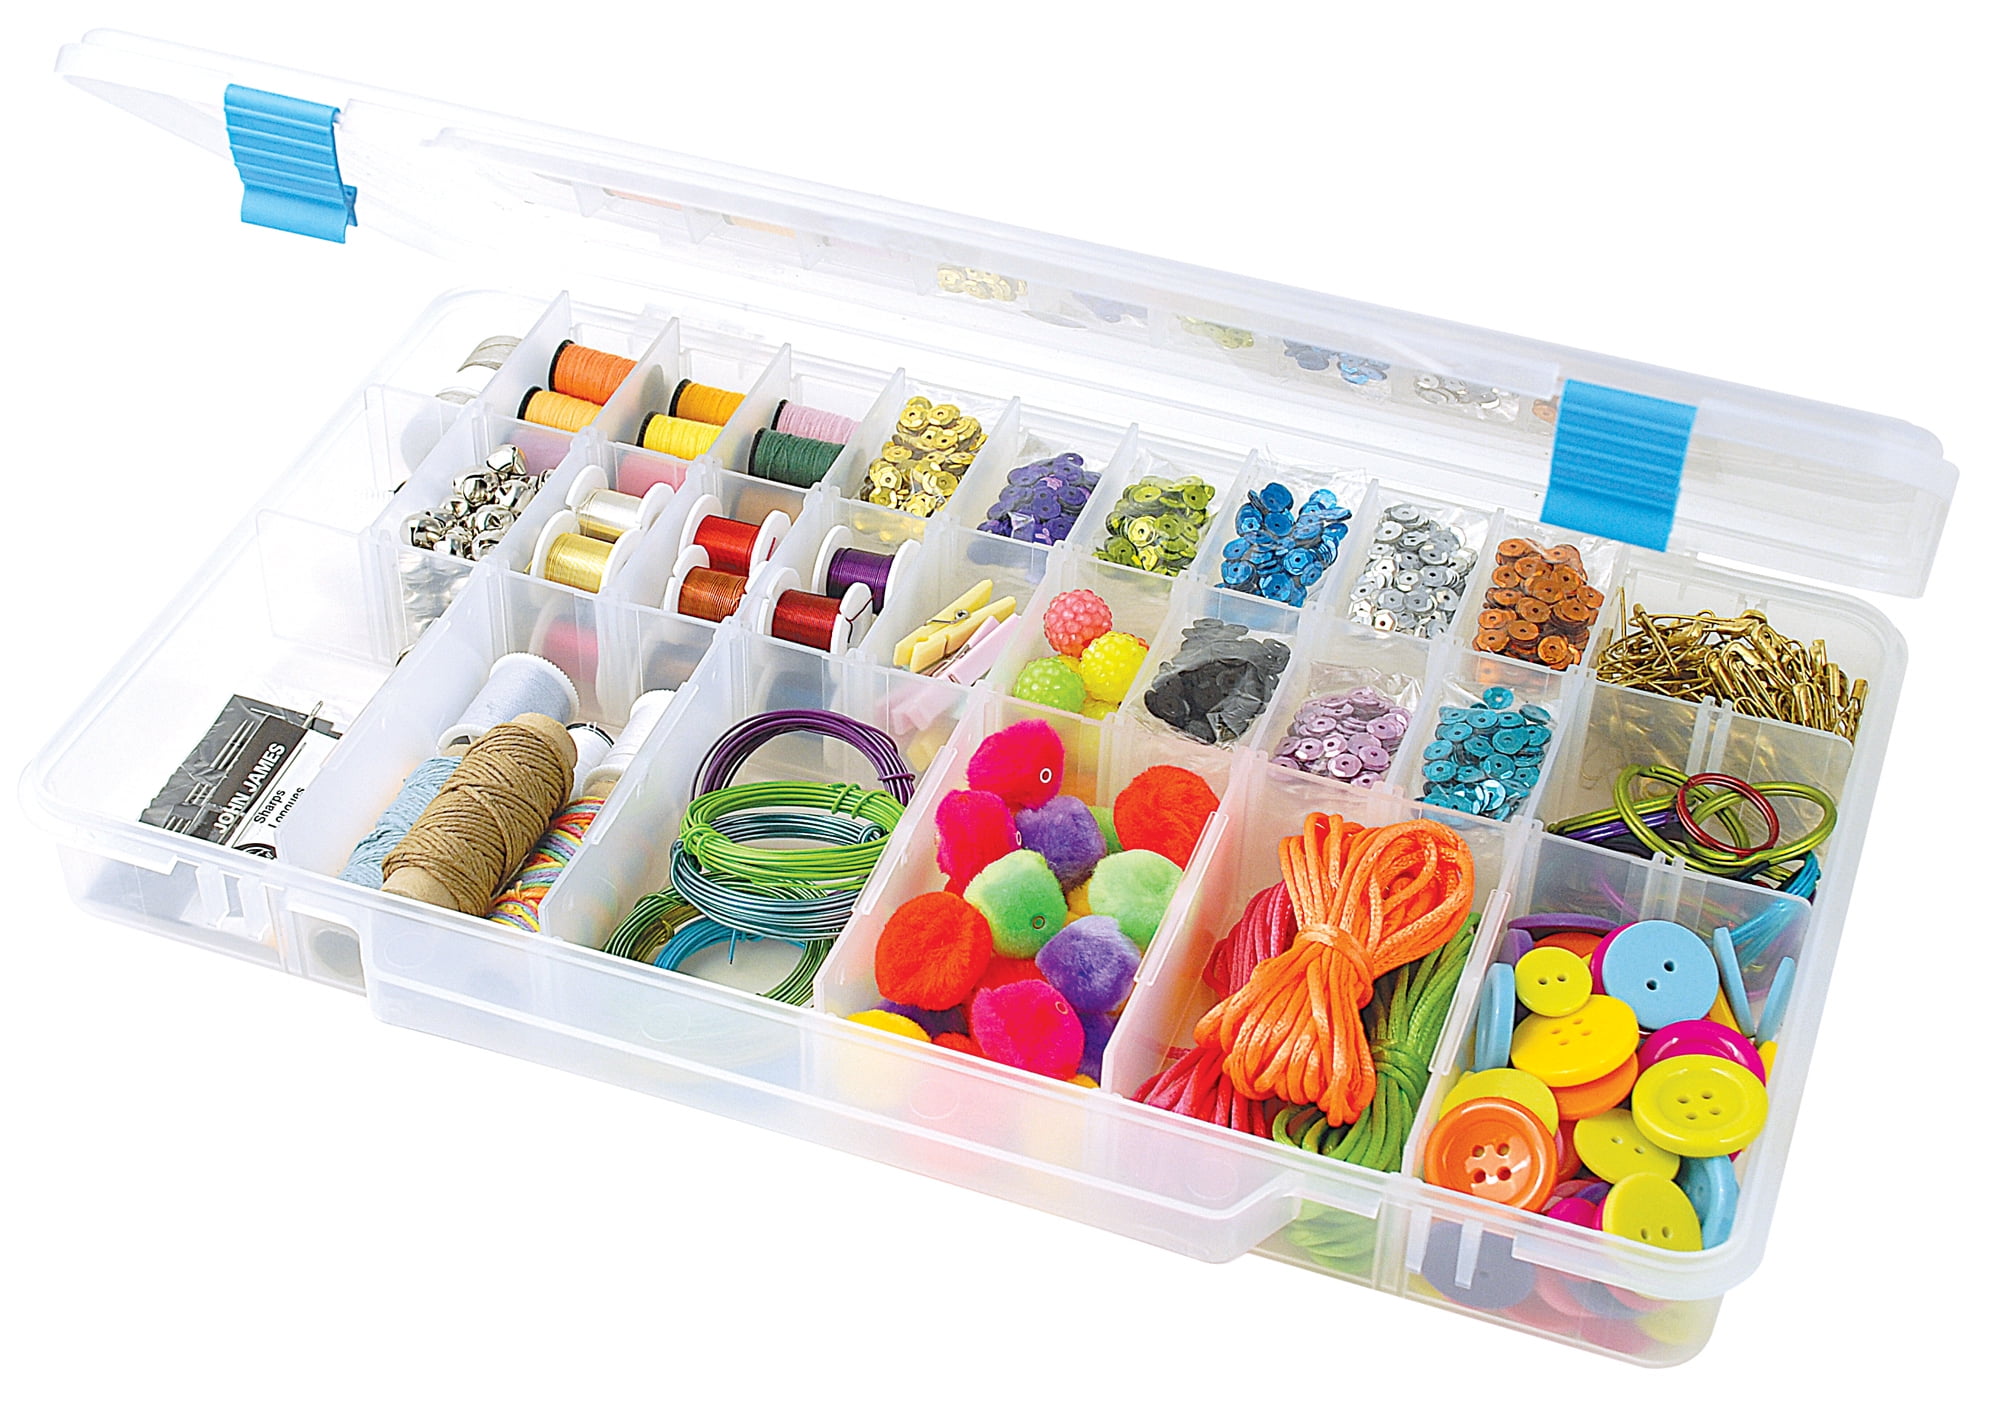 28 Compartment Organizer Box with Parkical Adjustable Dividers, 28 Grids  Plastic Storage Container for Jewelry, Craft DIY, Bead Organizer, Sewing,  Dip